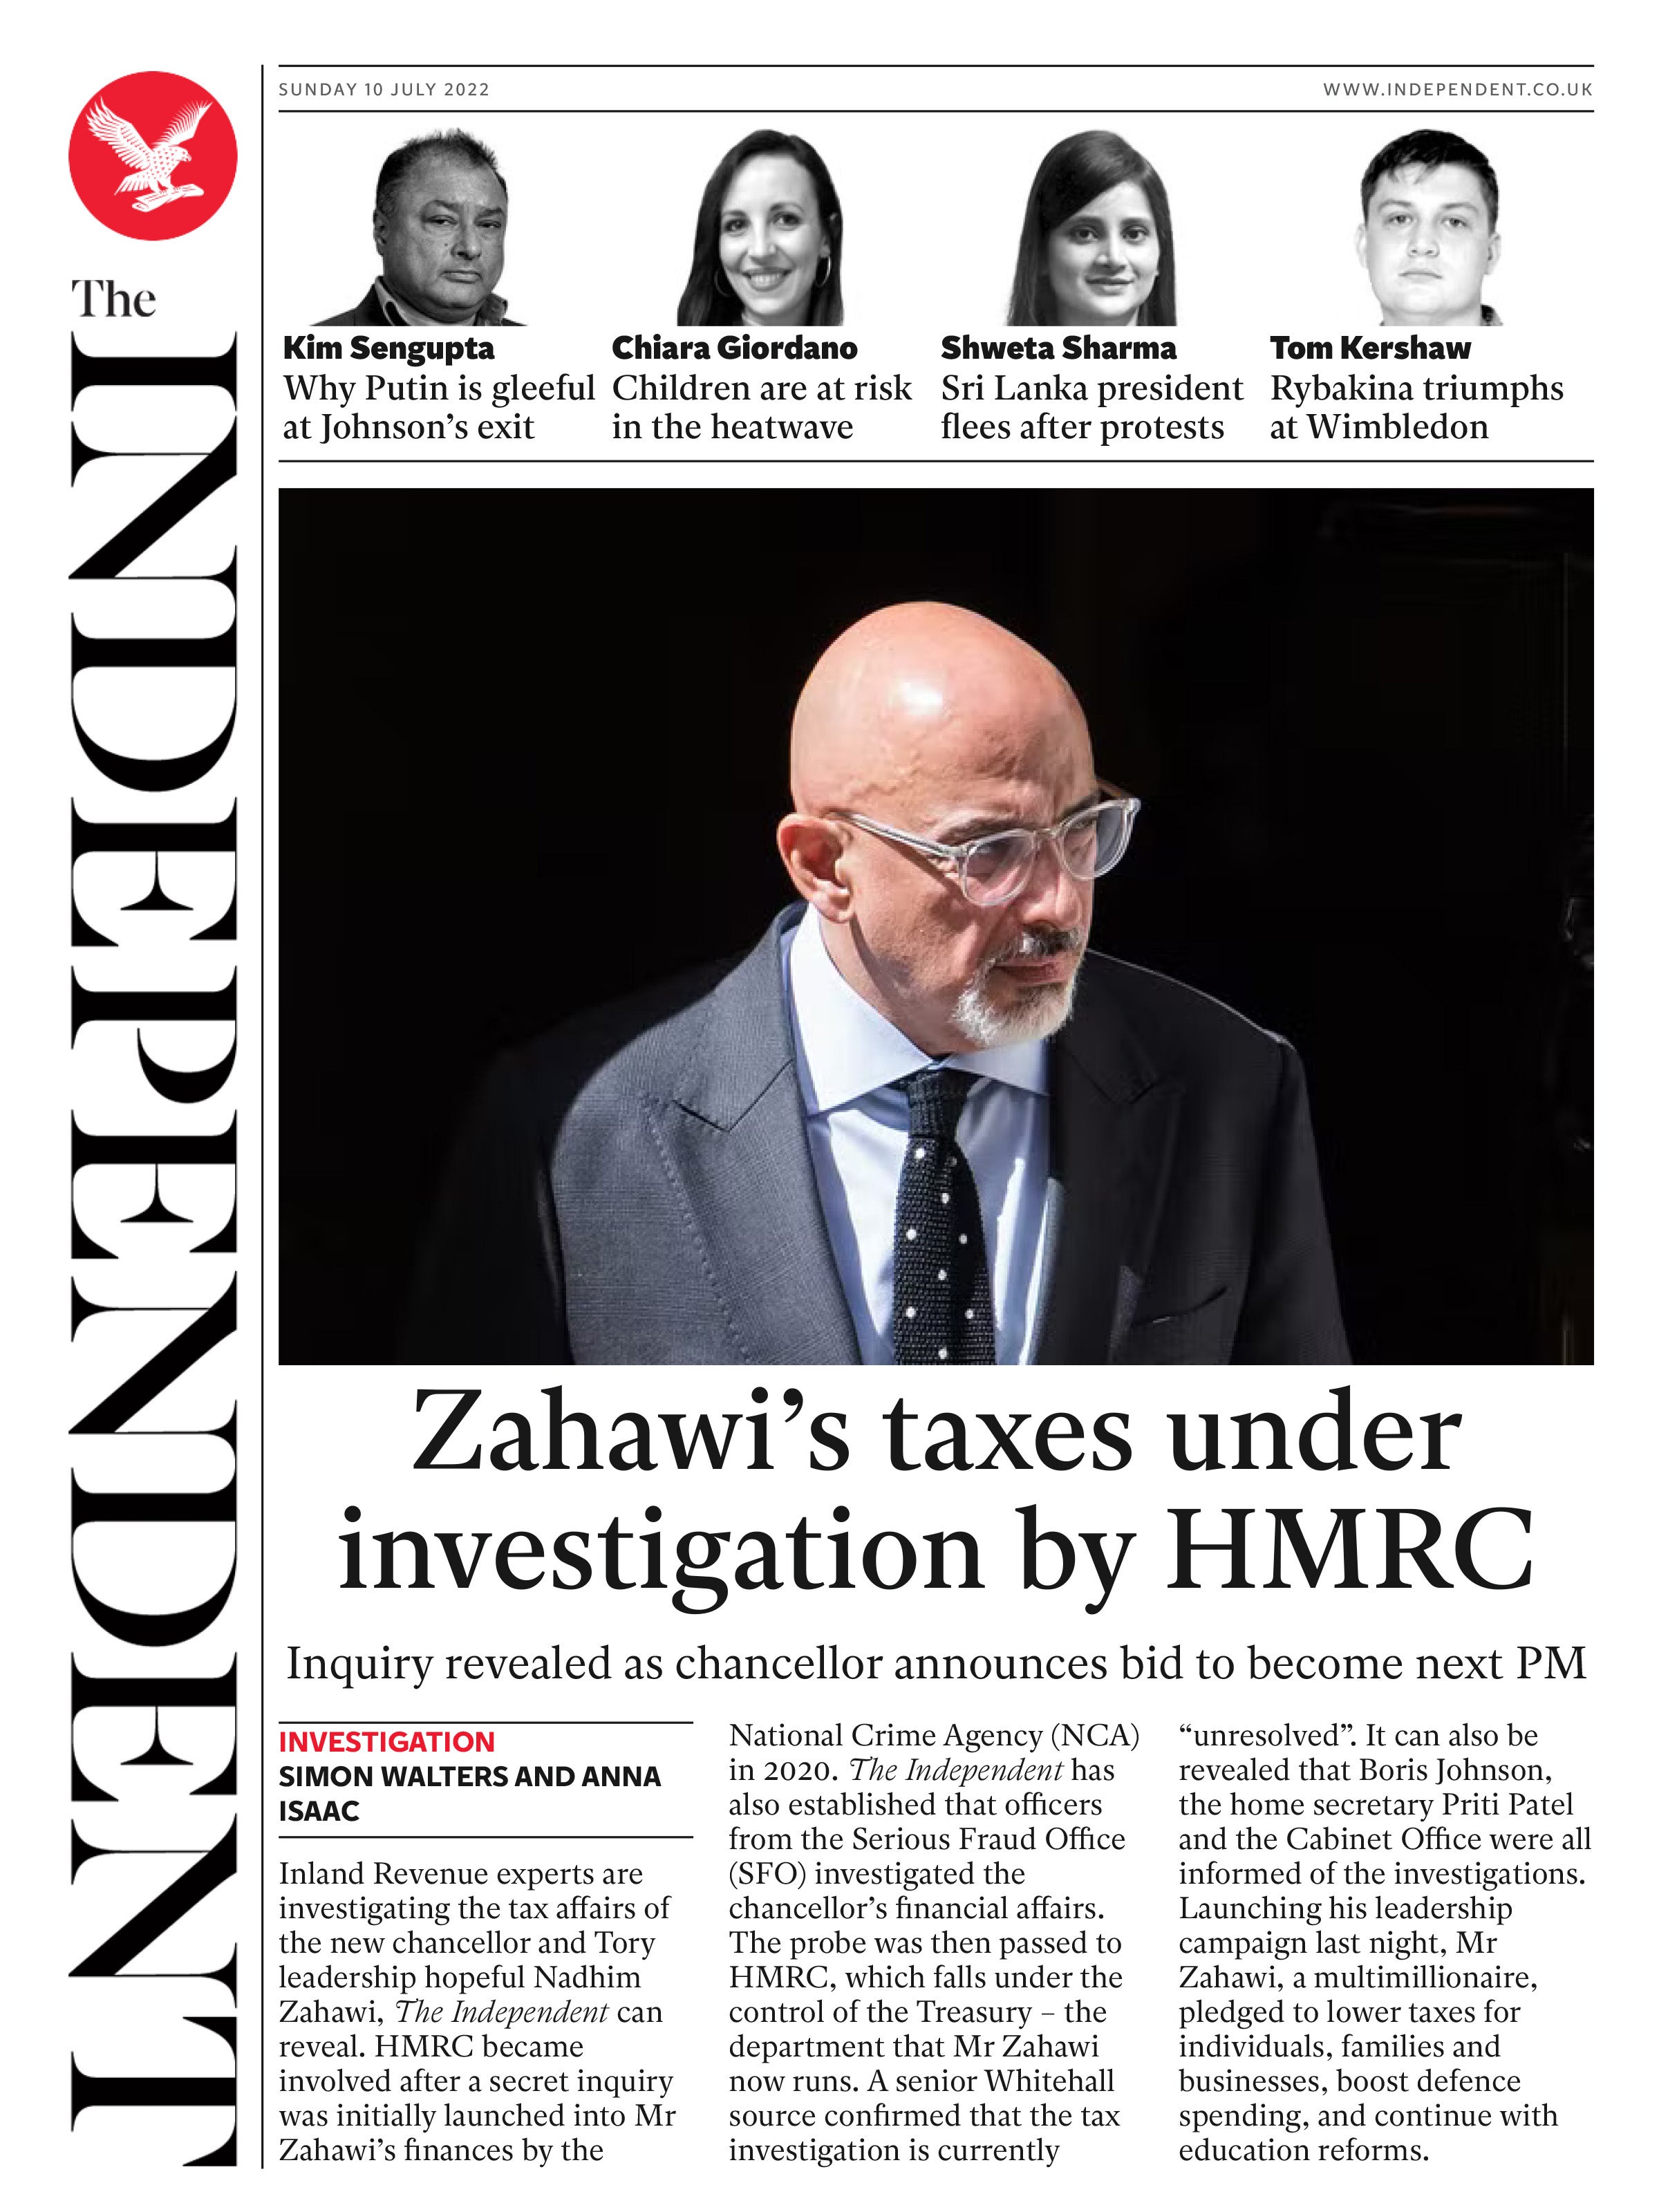 The investigation was sparked by The Independent’s revelation of an HMRC investigation into the MP’s tax affairs